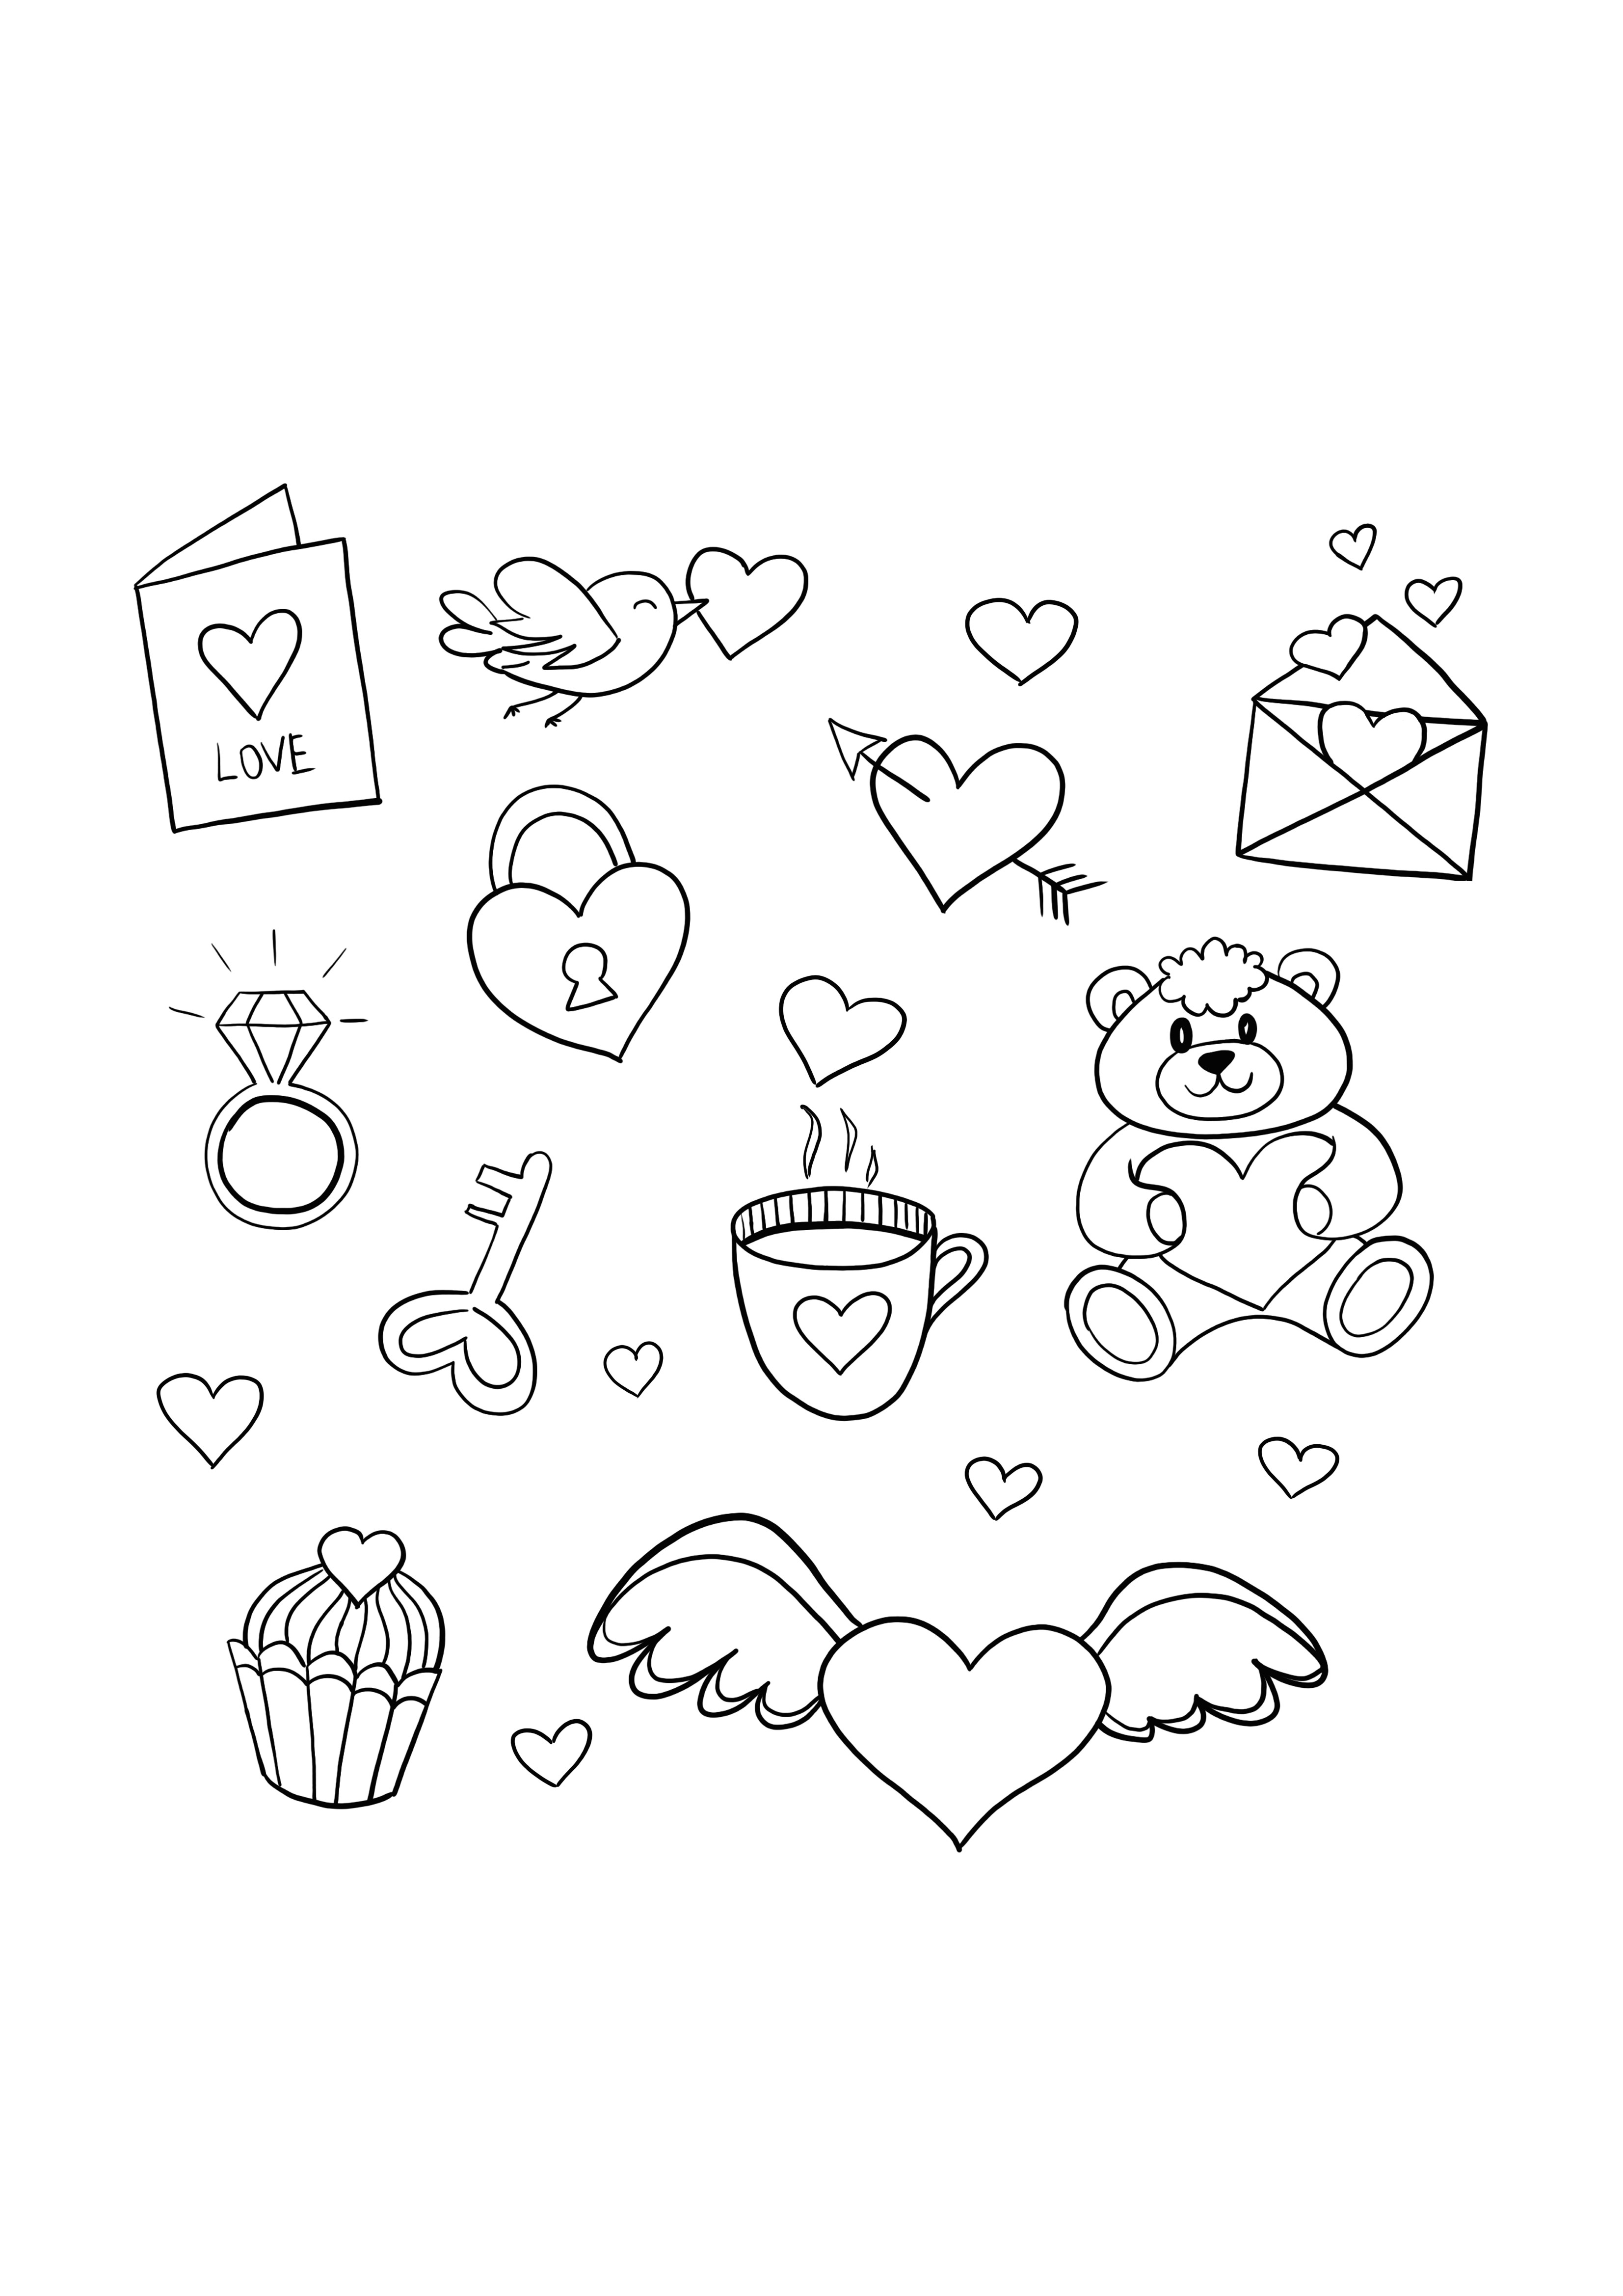 valentine’s elements easy to color and print for free